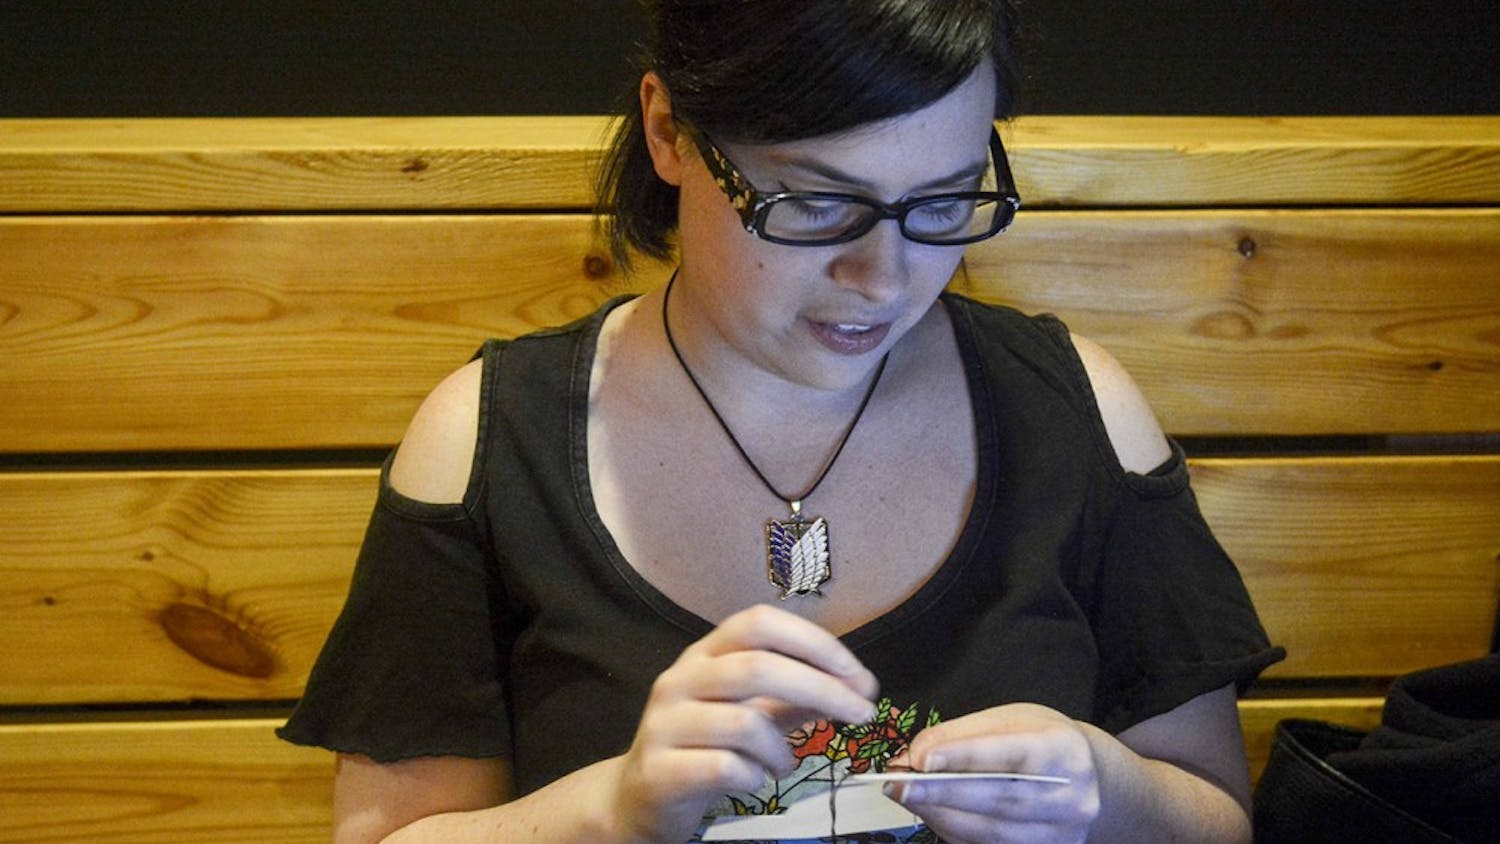 Abby bouen makes cross stitching in the Valentine's themed "Stitch & Bitch" event on Monday evening at Cardinal Spirits. 